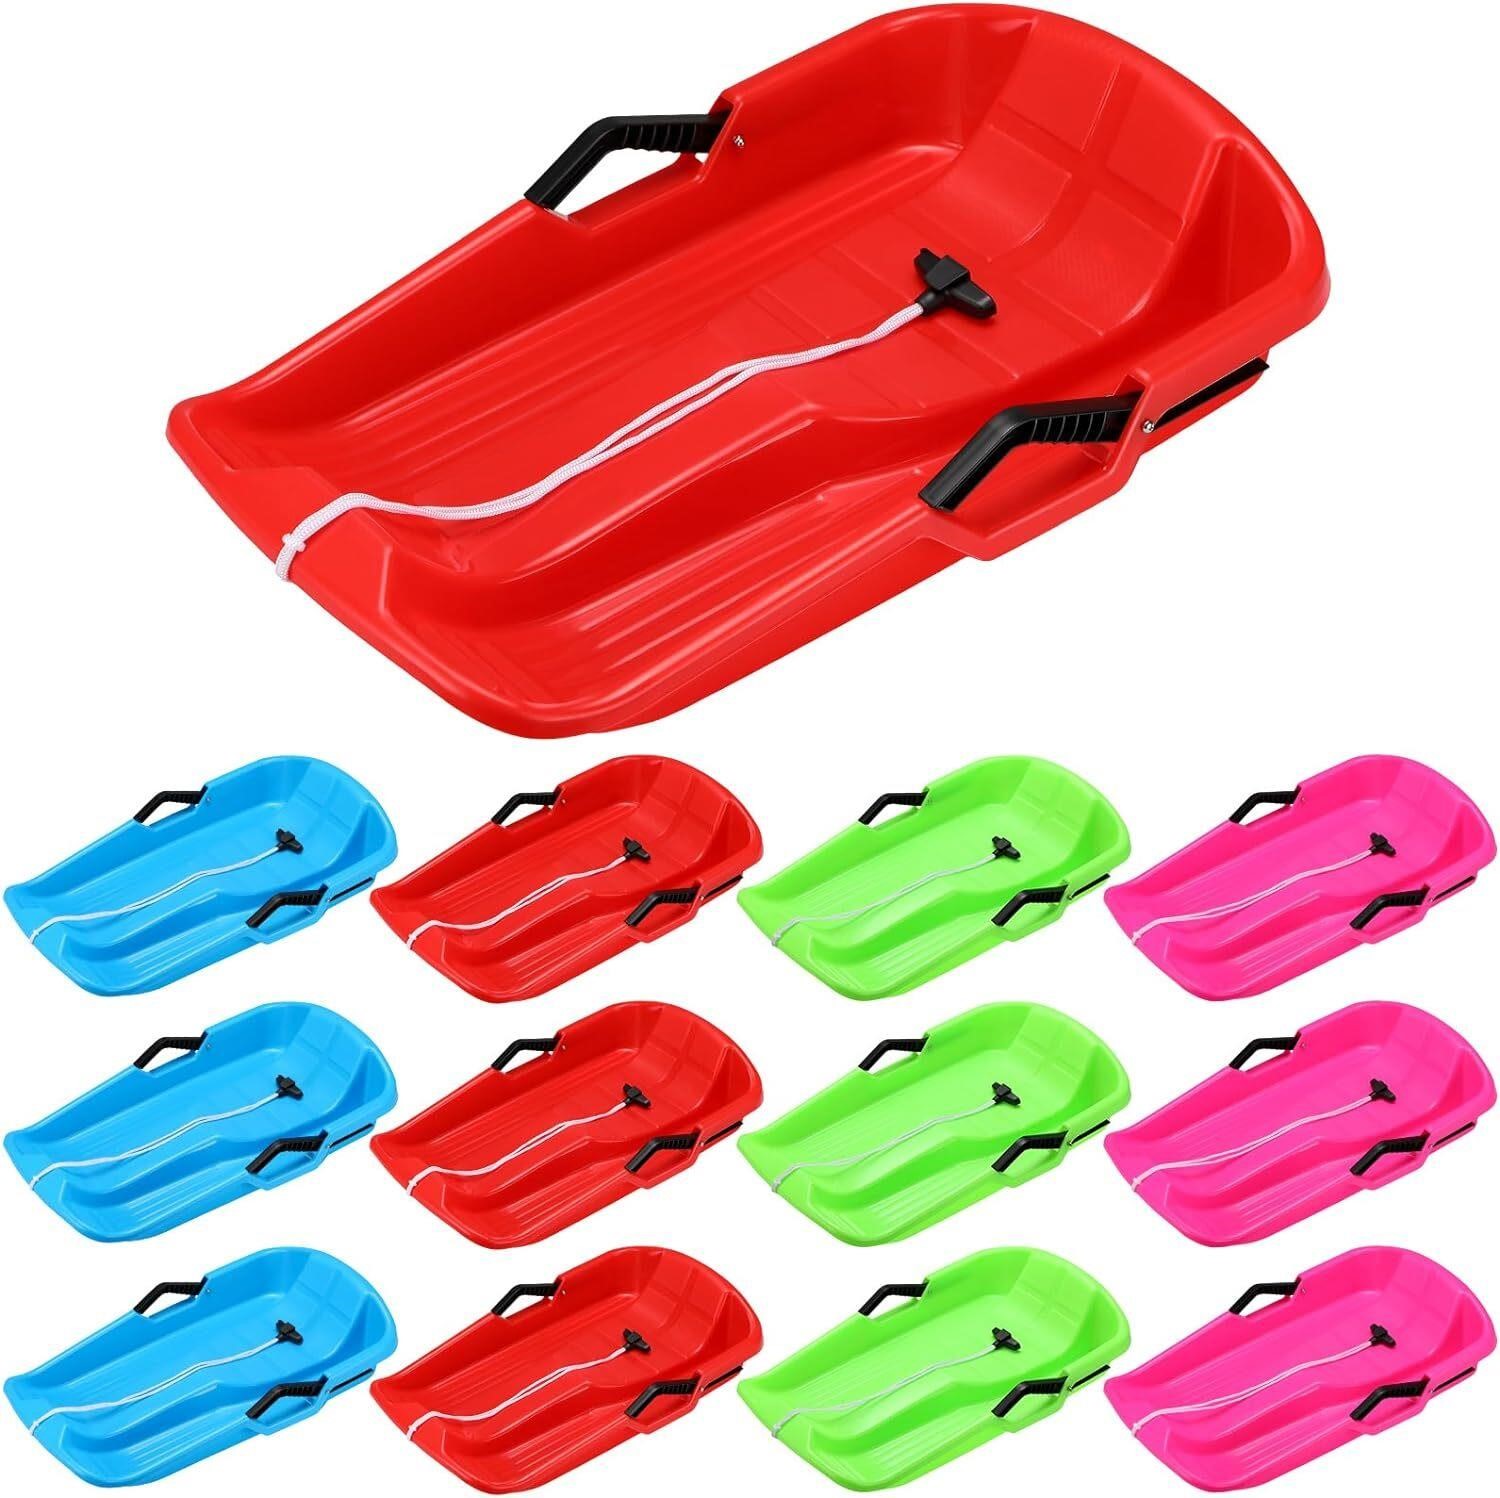 26-Inch Kids' Sand Sled - 12 Pieces  4 Colors